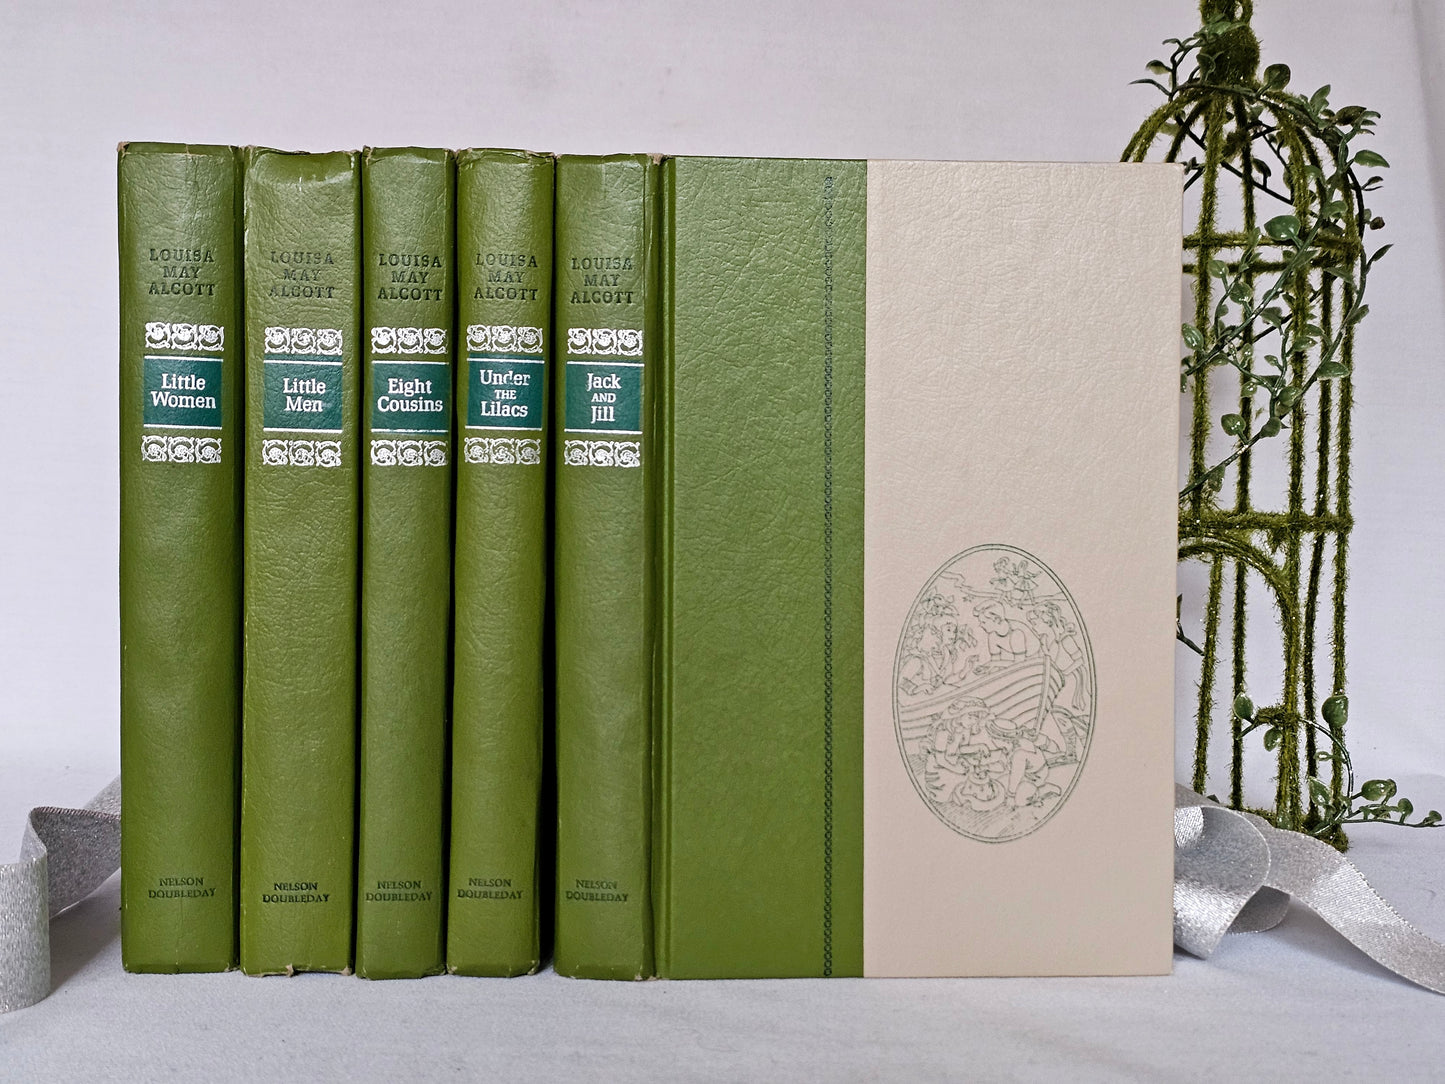 1955 Louisa May Alcott Vintage Book Set / Five Charming Illustrated Volumes / Nelson Doubleday / In Good Condition / Little Women etc.